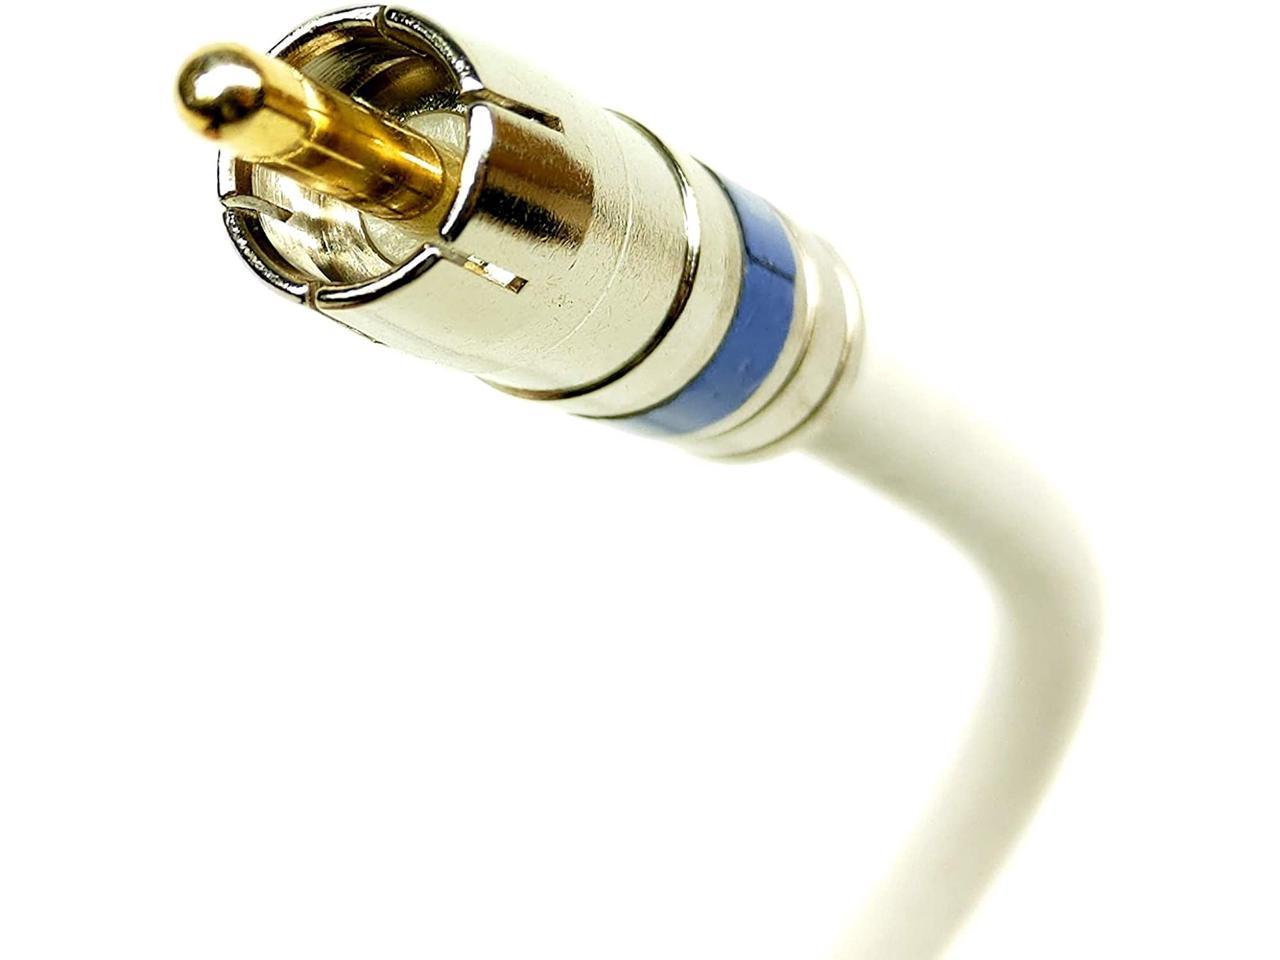 PSI - RCA Audio Cable, Bare Copper 18 AWG Solid Core Center Conductor, Gold Plated Pin, Brass Fittings, Bi-Shield 60% Braid 100% Foil, Custom Cut and Assembled in USA (105 - 200 feet, White)